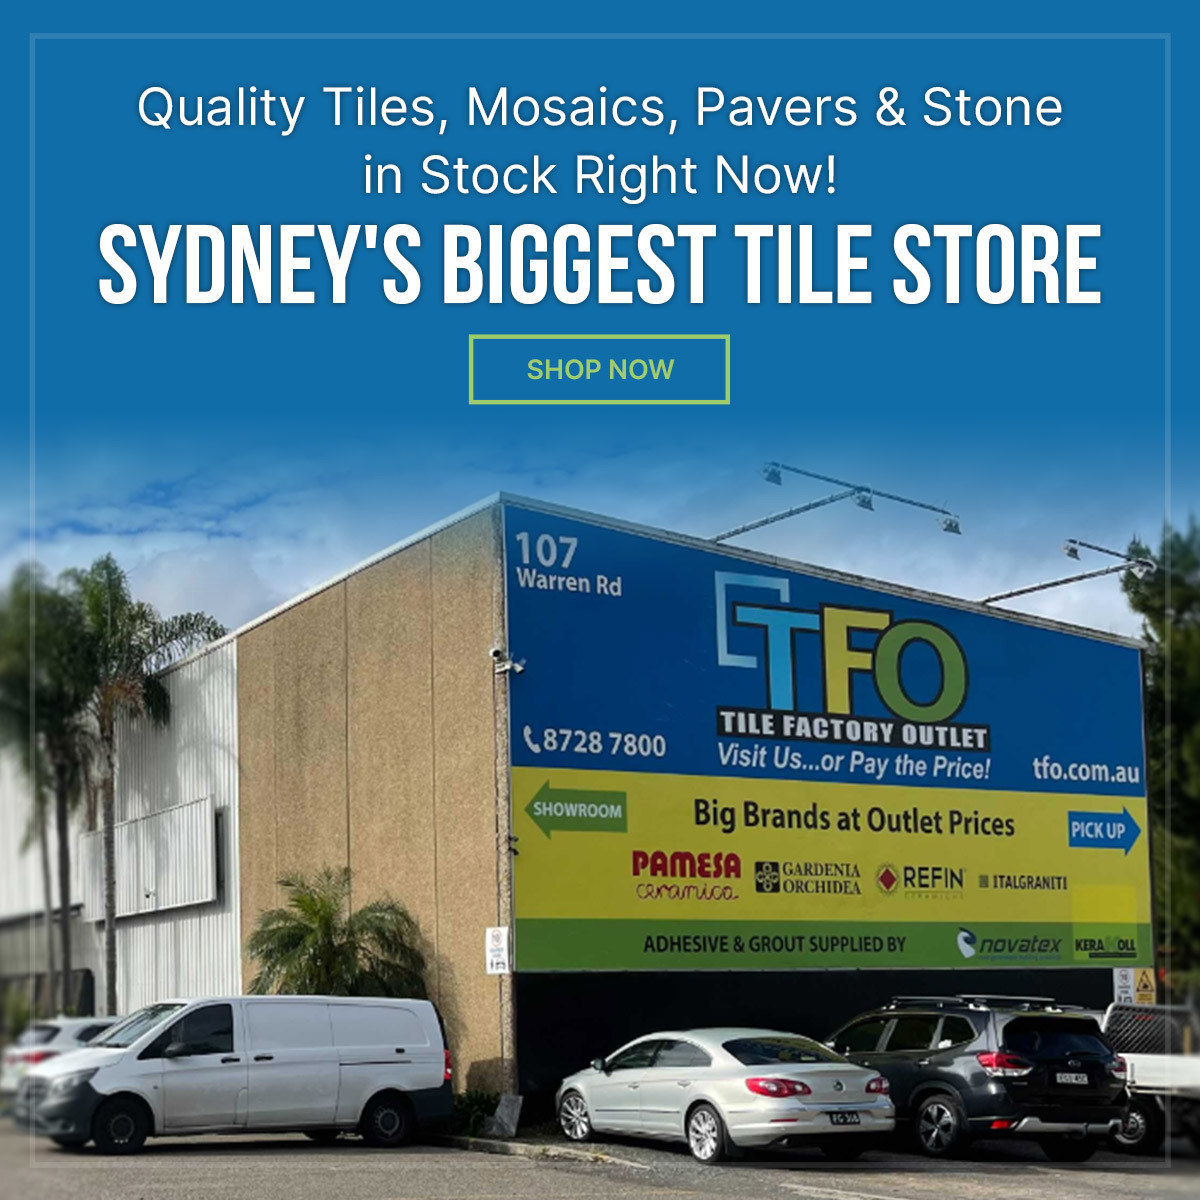 Timber Tiles Sydney – Top Italian Indoor And Outdoor Tiles At Sydney’s Lowest Prices